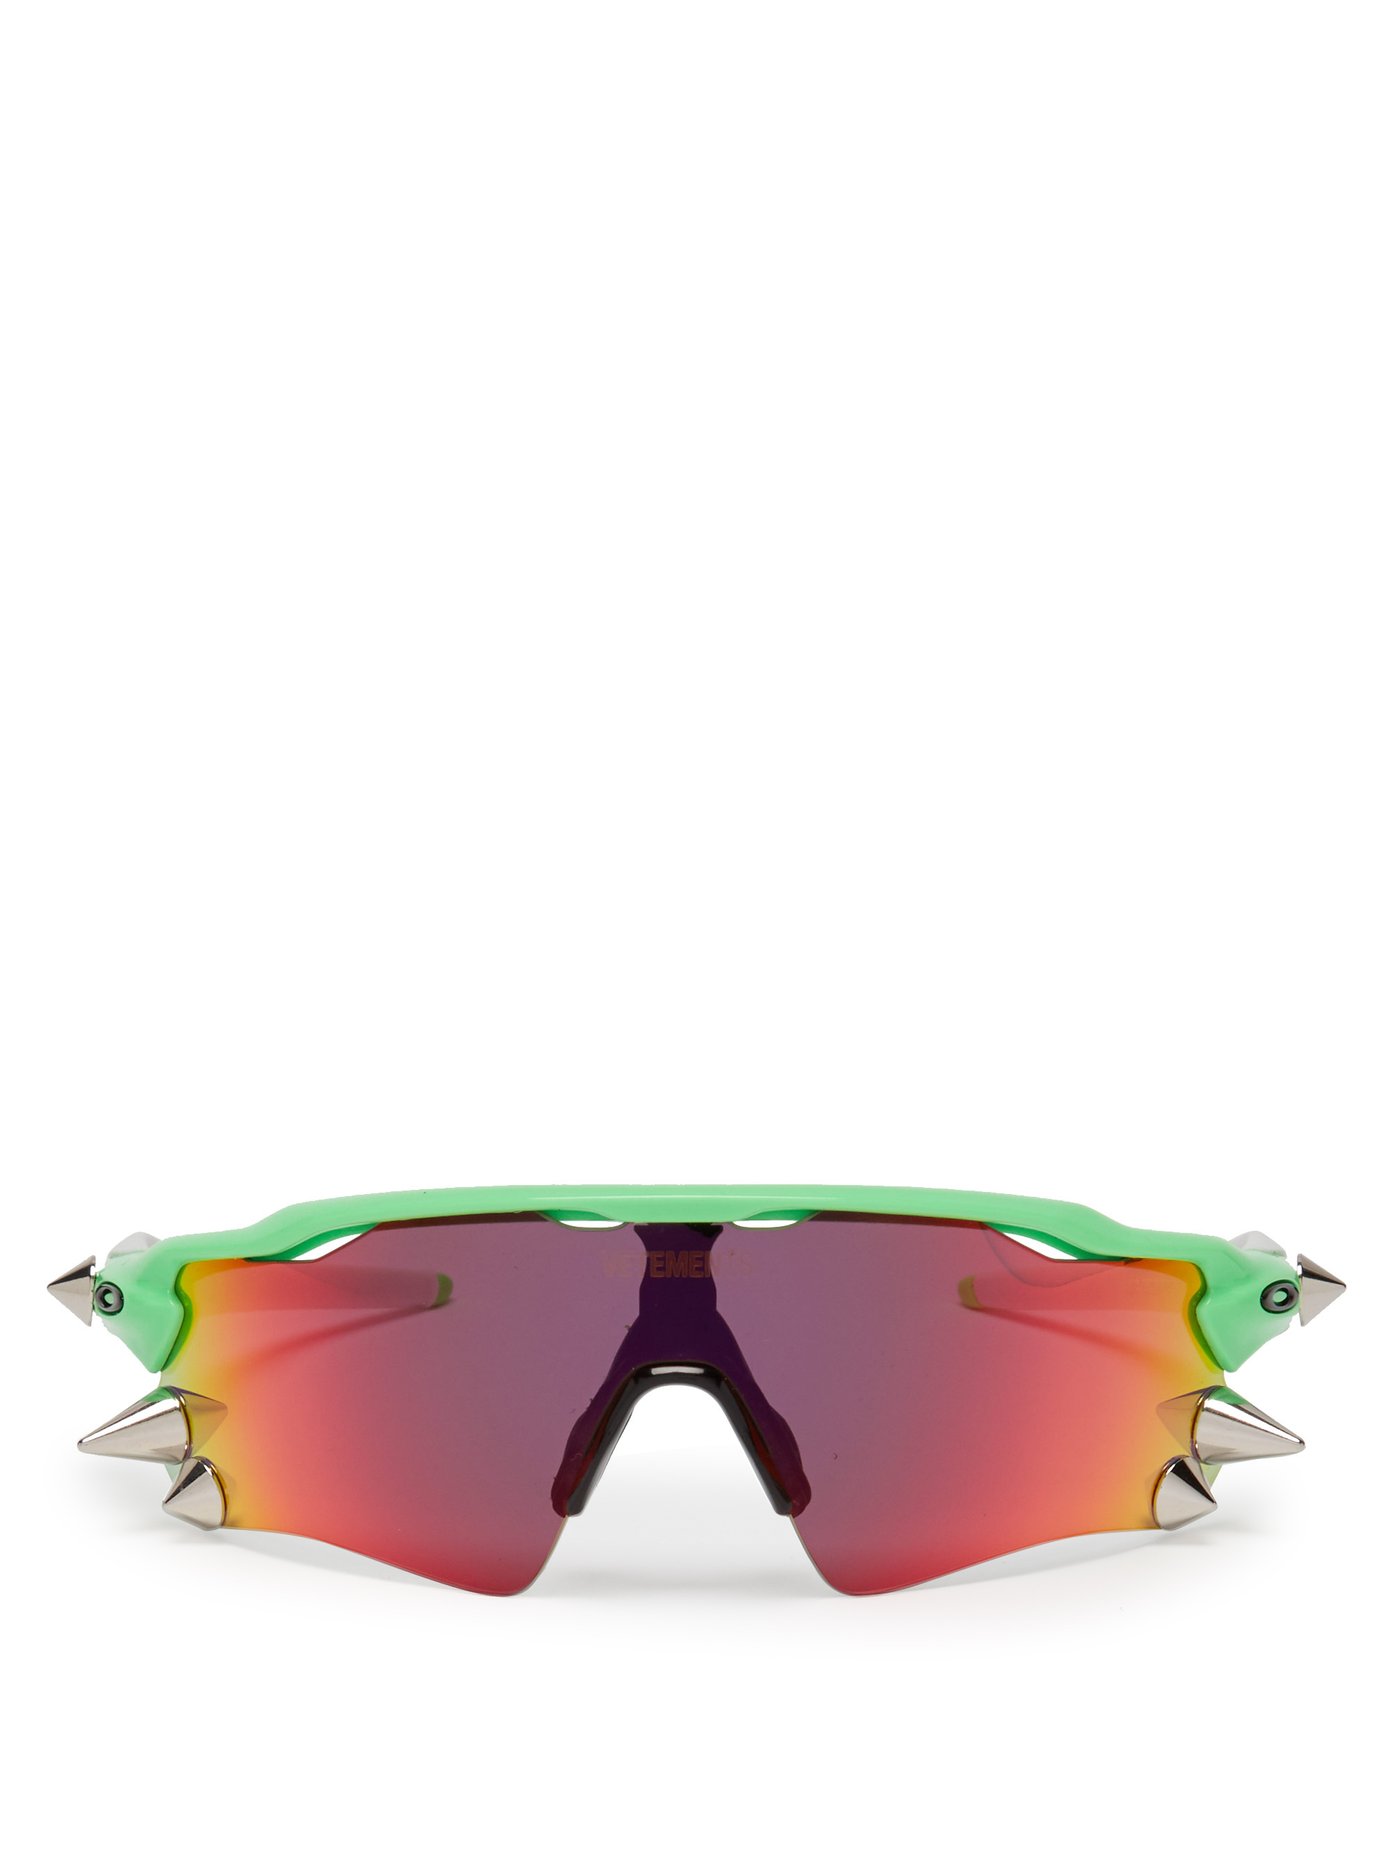 where can you buy oakley sunglasses